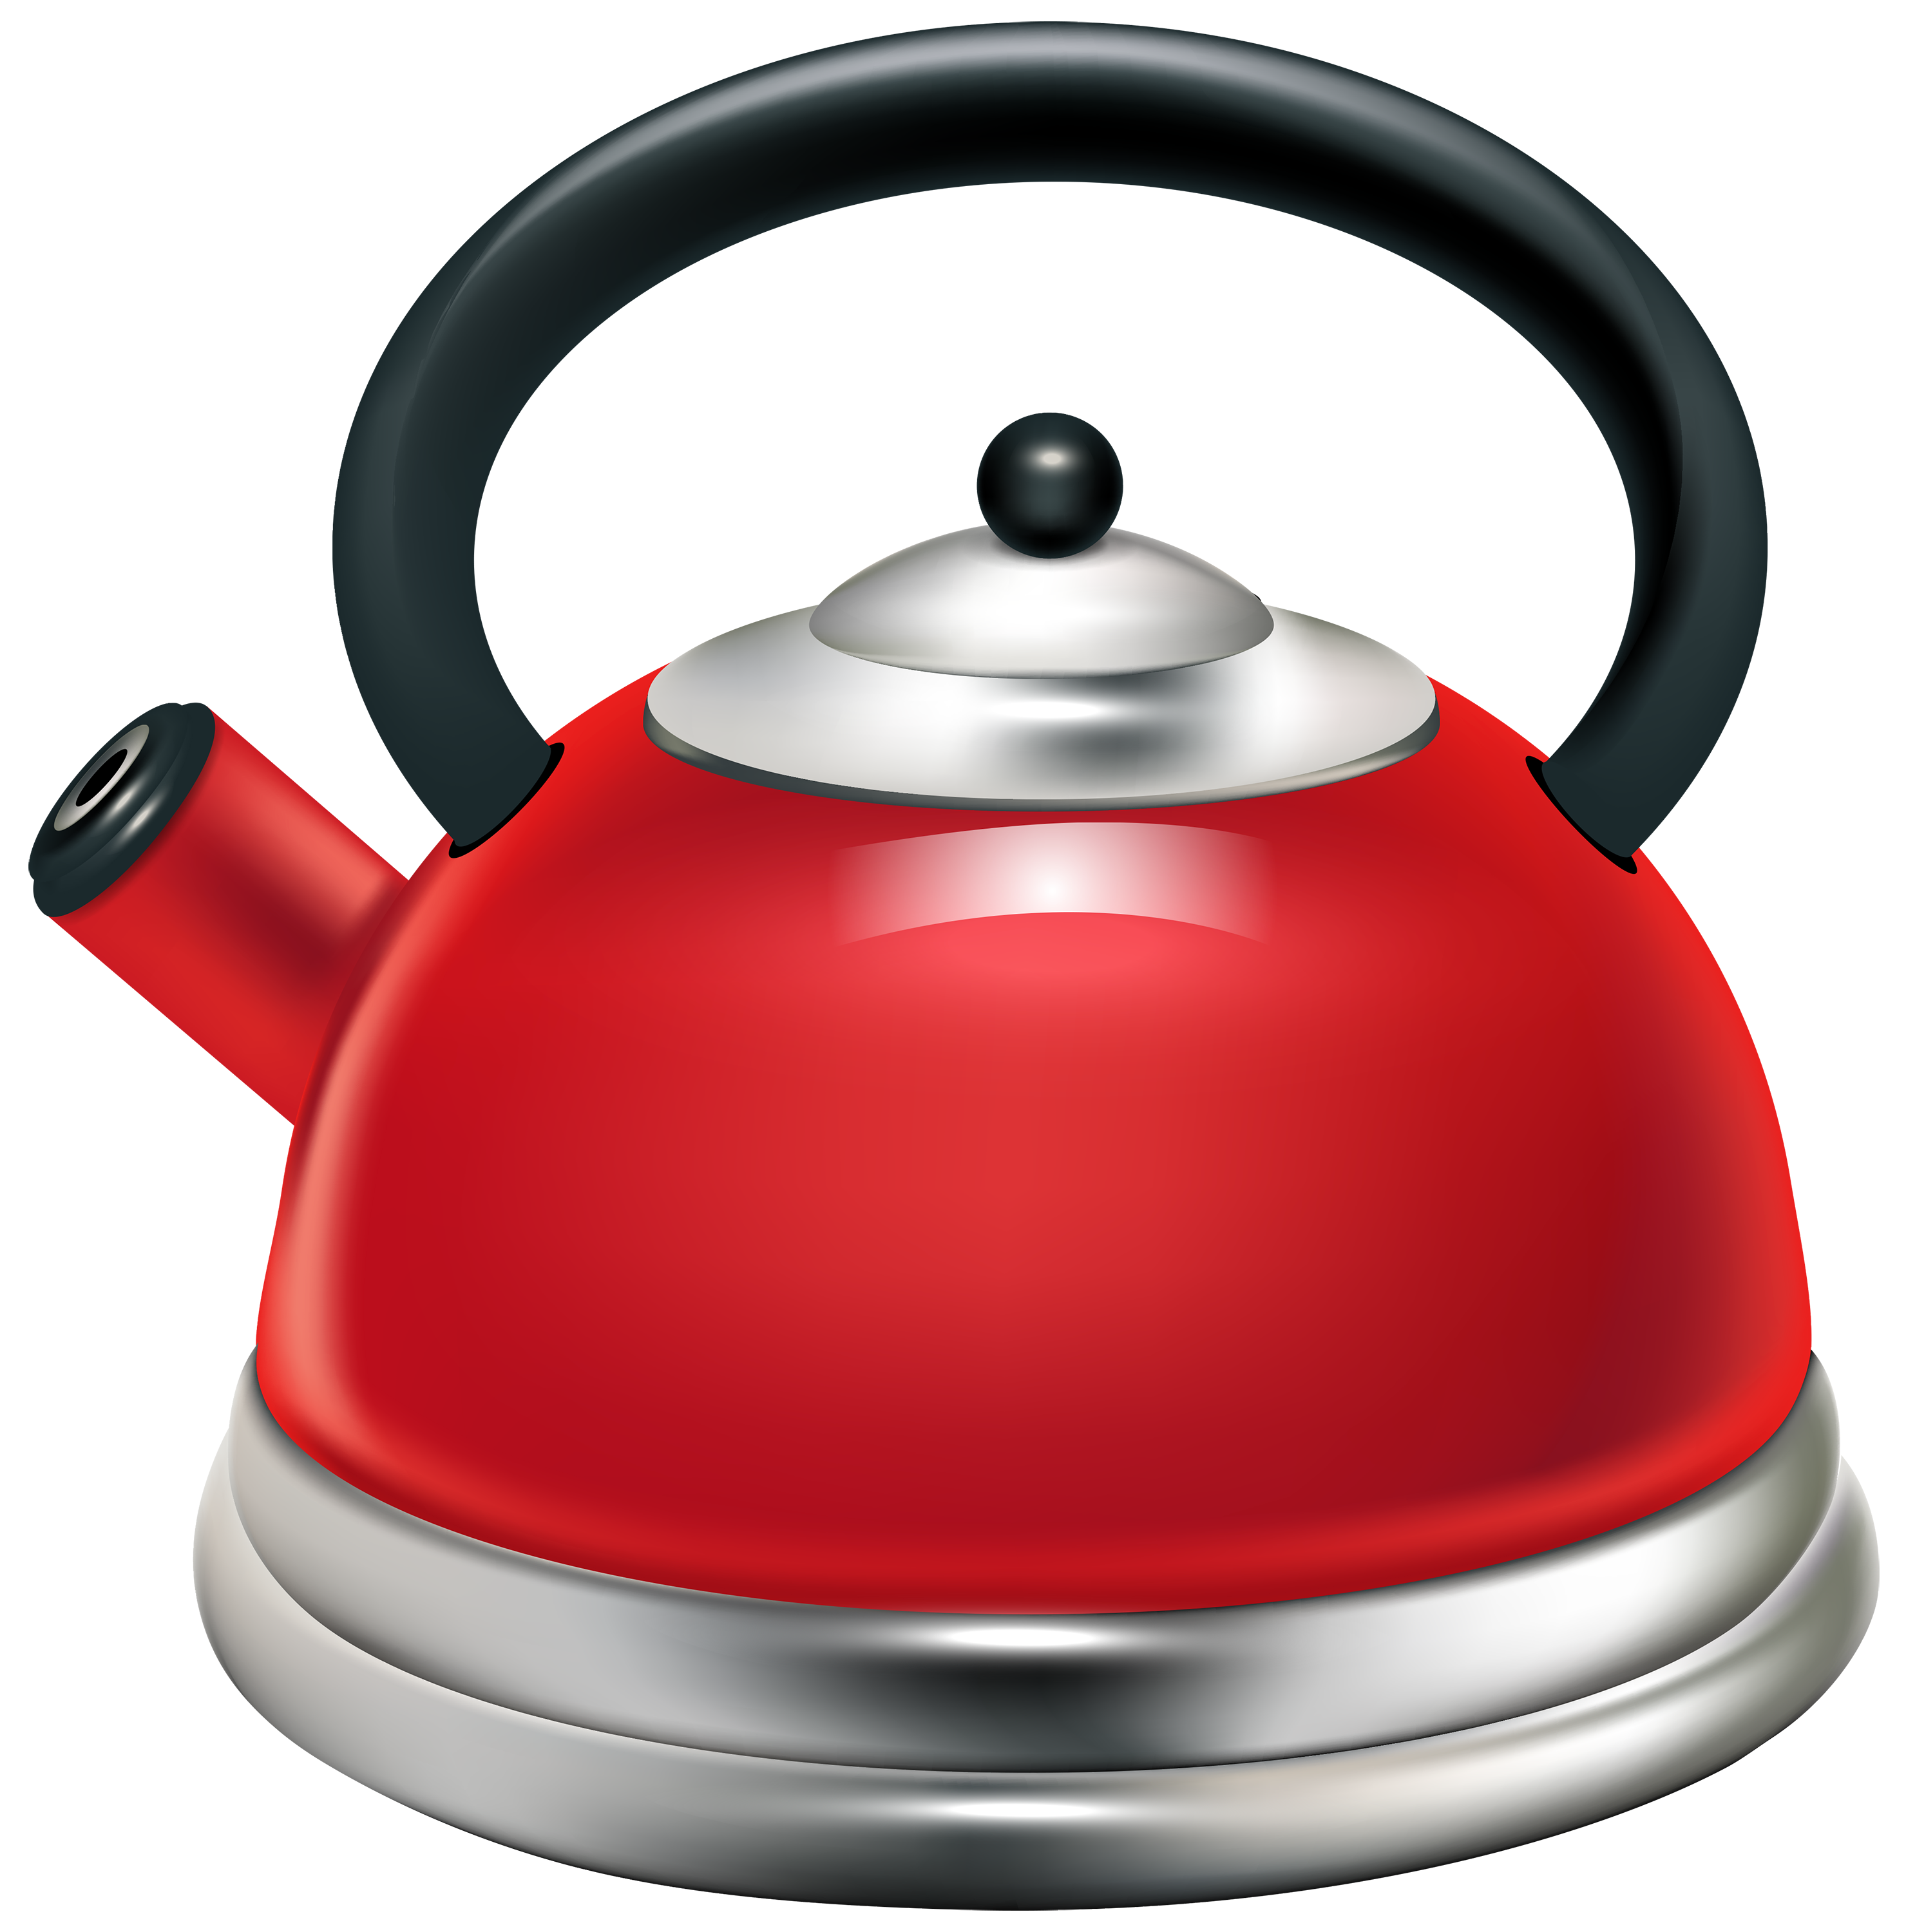 clipart of kettle - photo #1